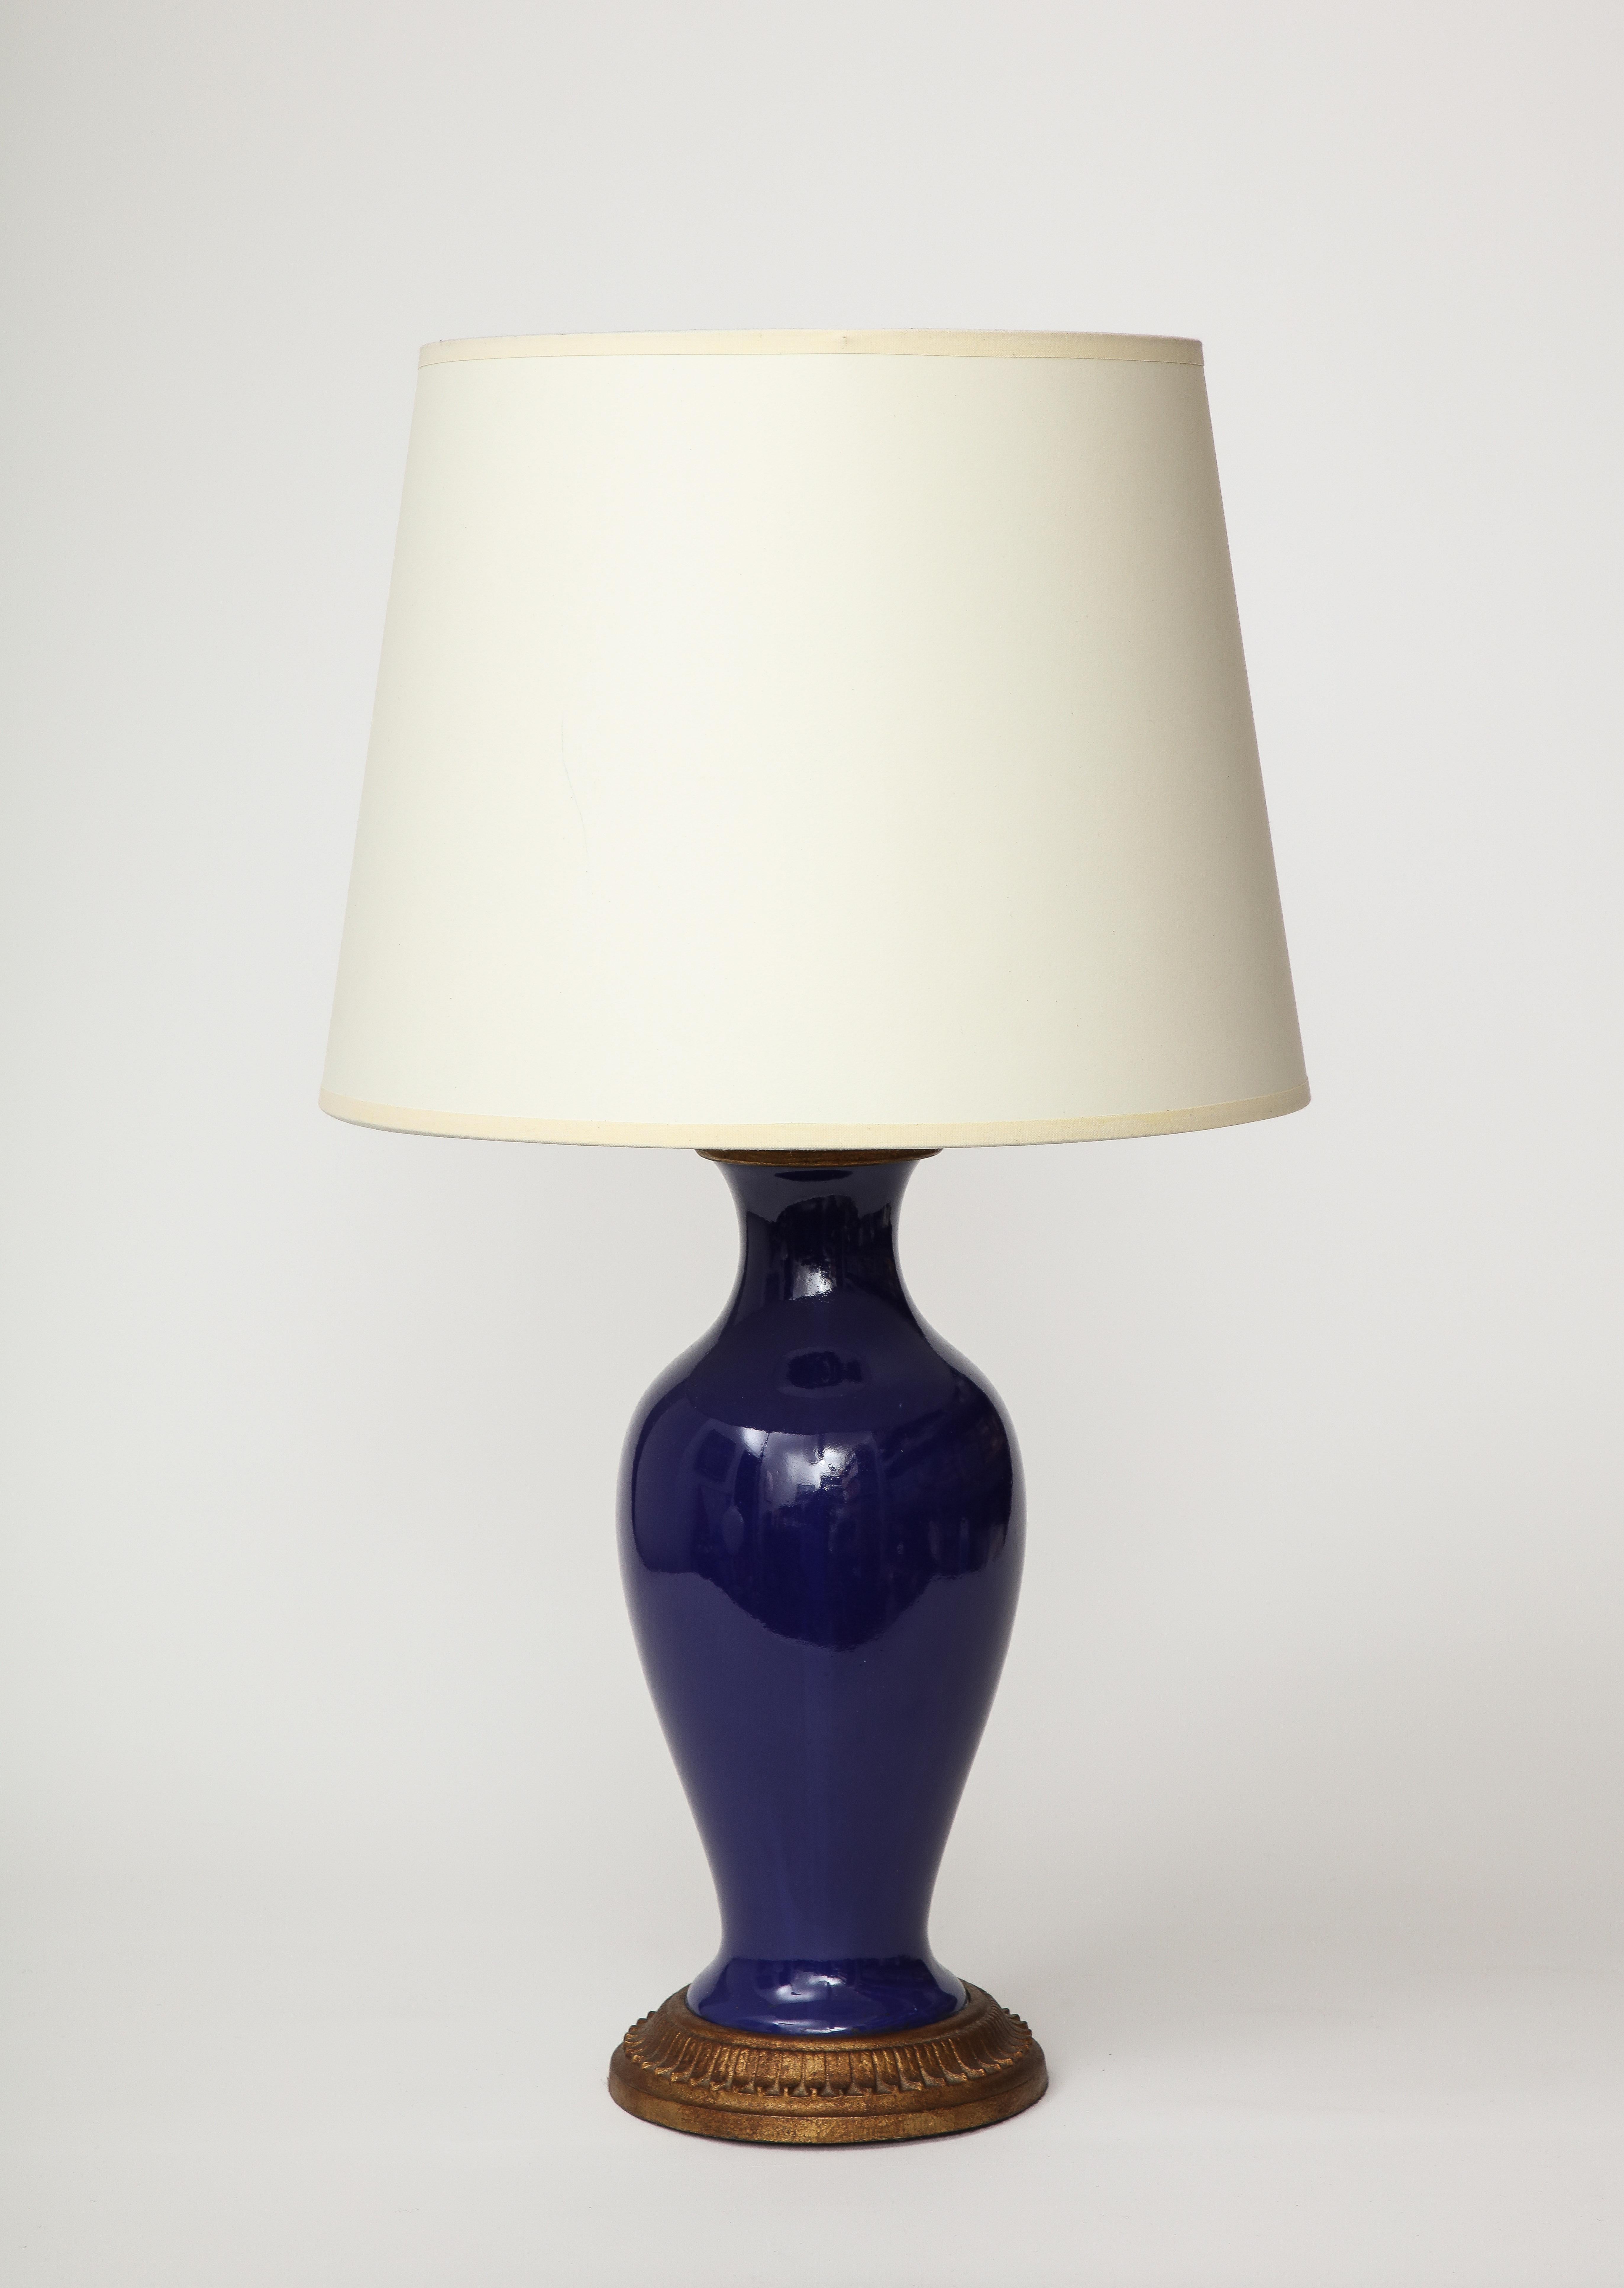 Small, classic table lamp made of copper coated with deep blue lapis enamel.

This table lamp was recently rewired with a black twisted silk cord, bronze hardware, a dimmer at the neck, and an adjustable shade harp.

Overall Height: